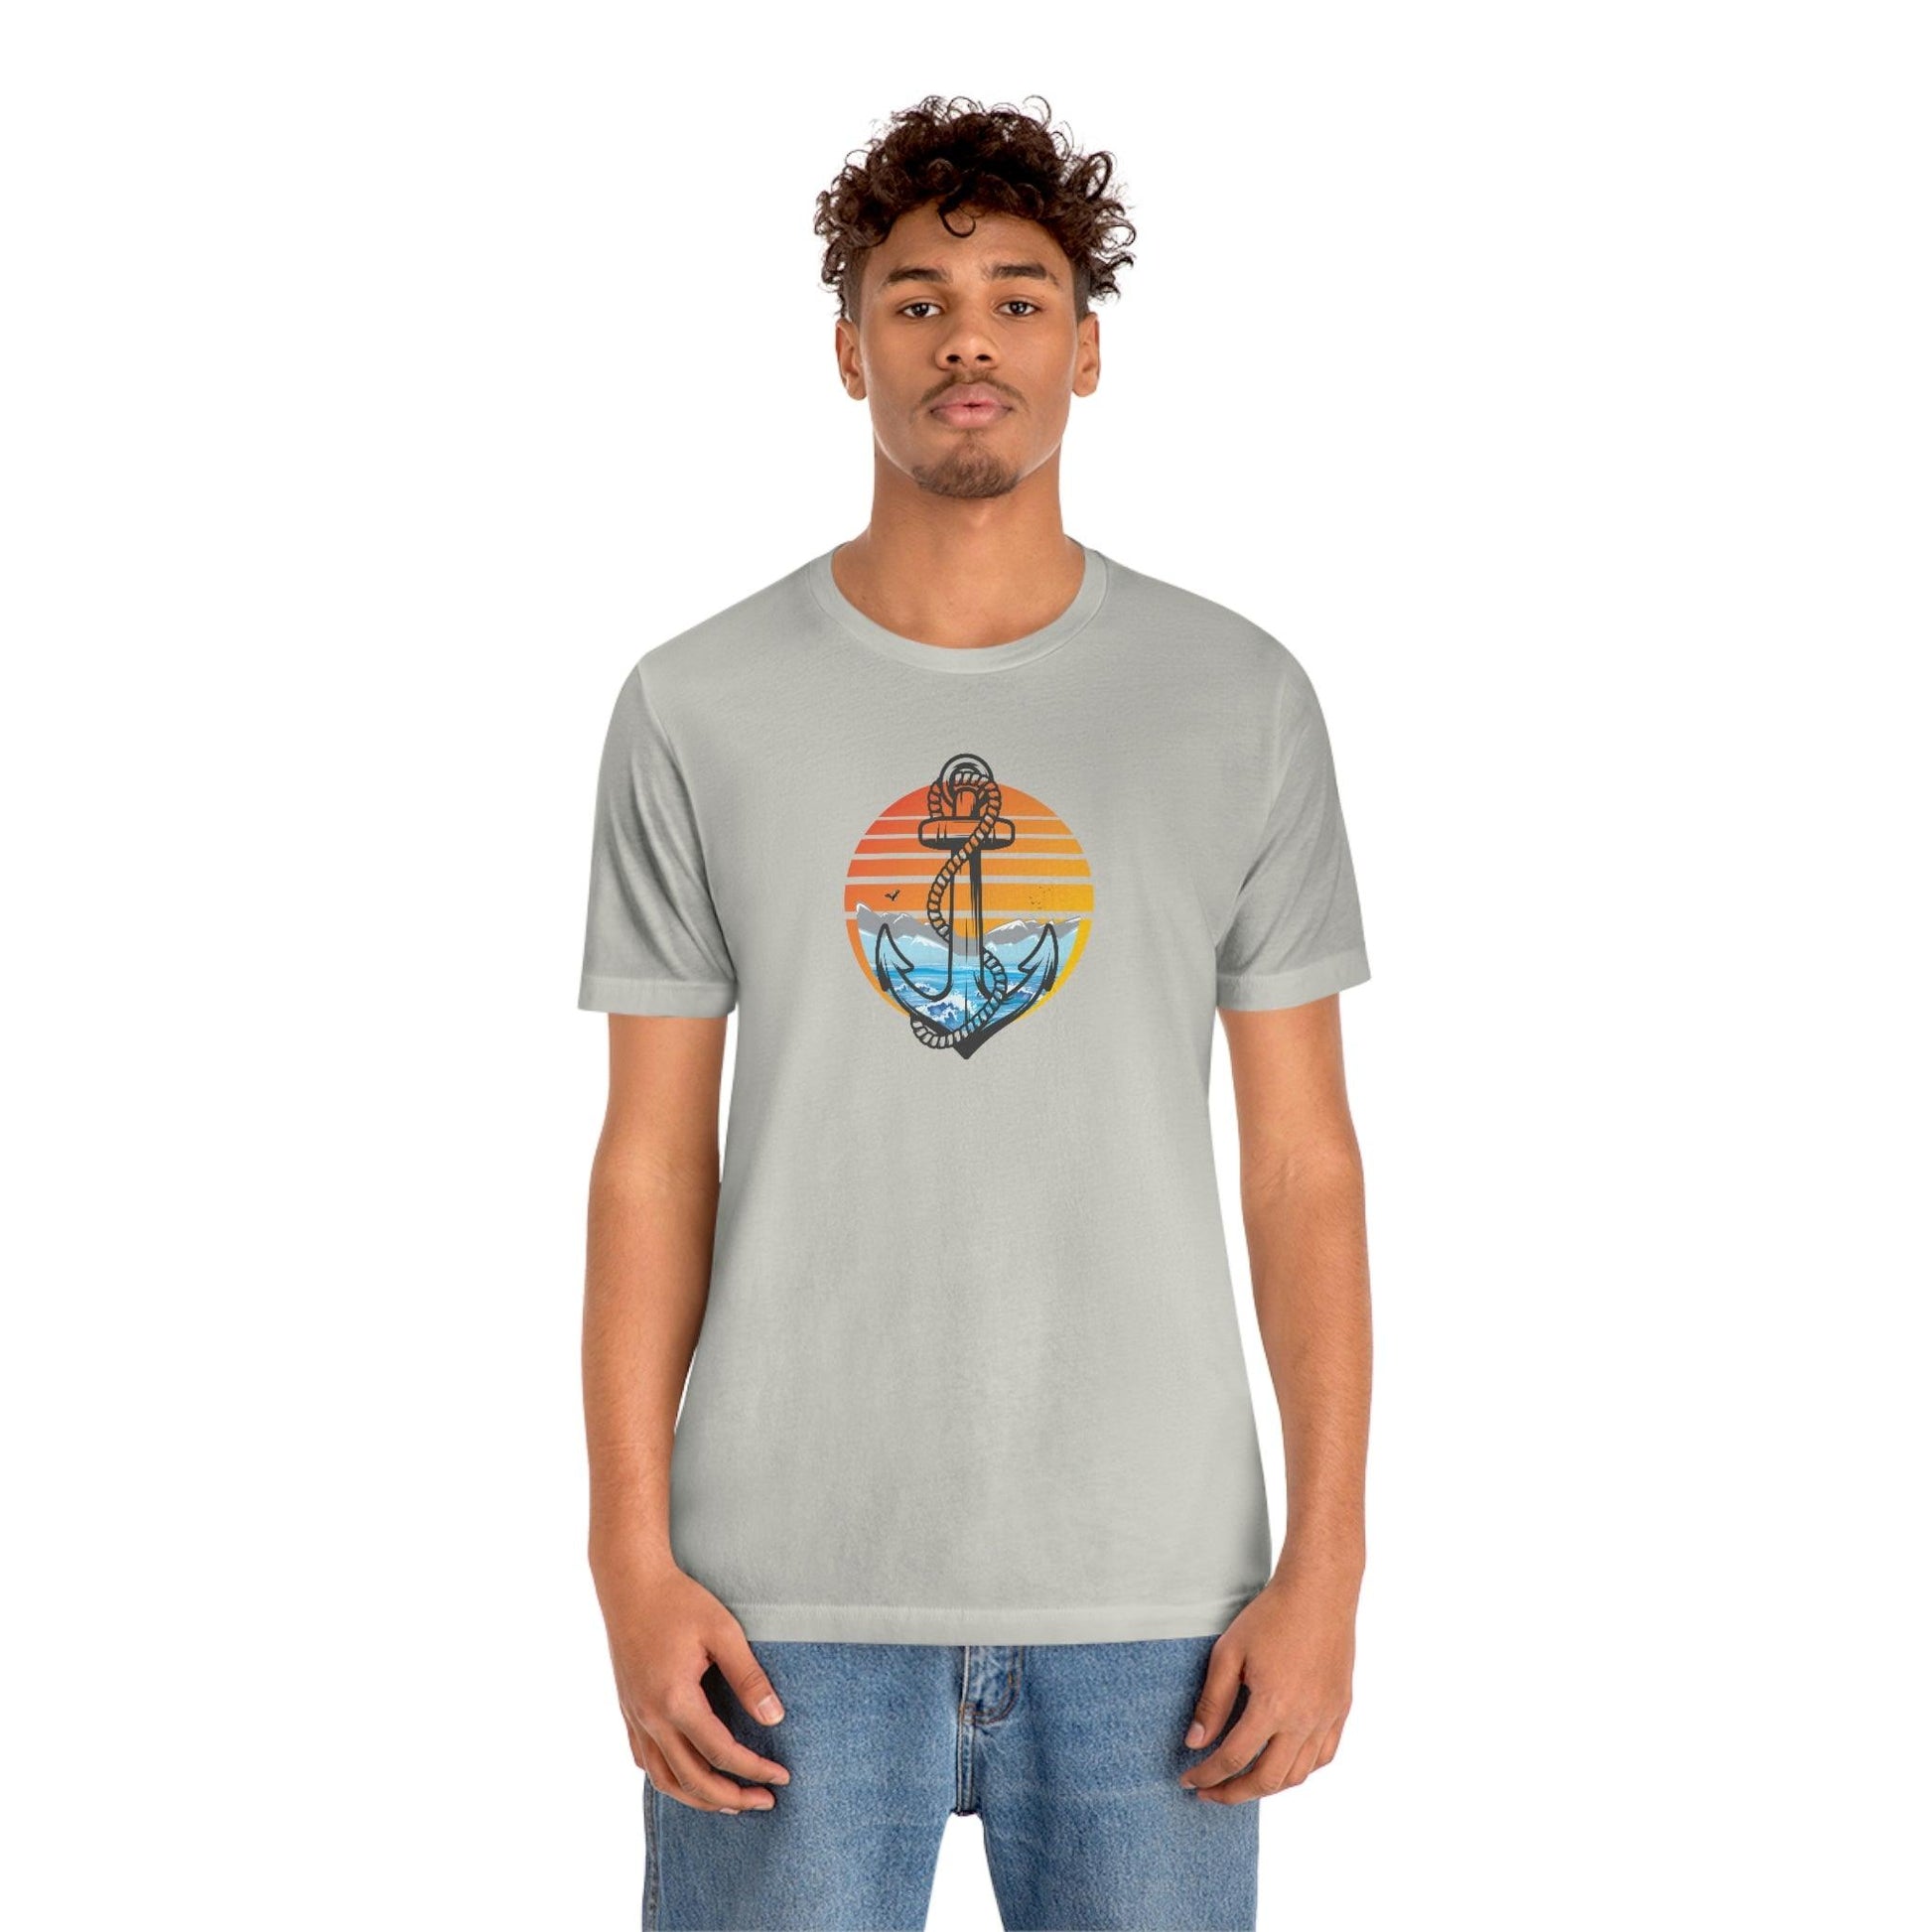 Anchored to the Sea - Wicked Naughty Apparel